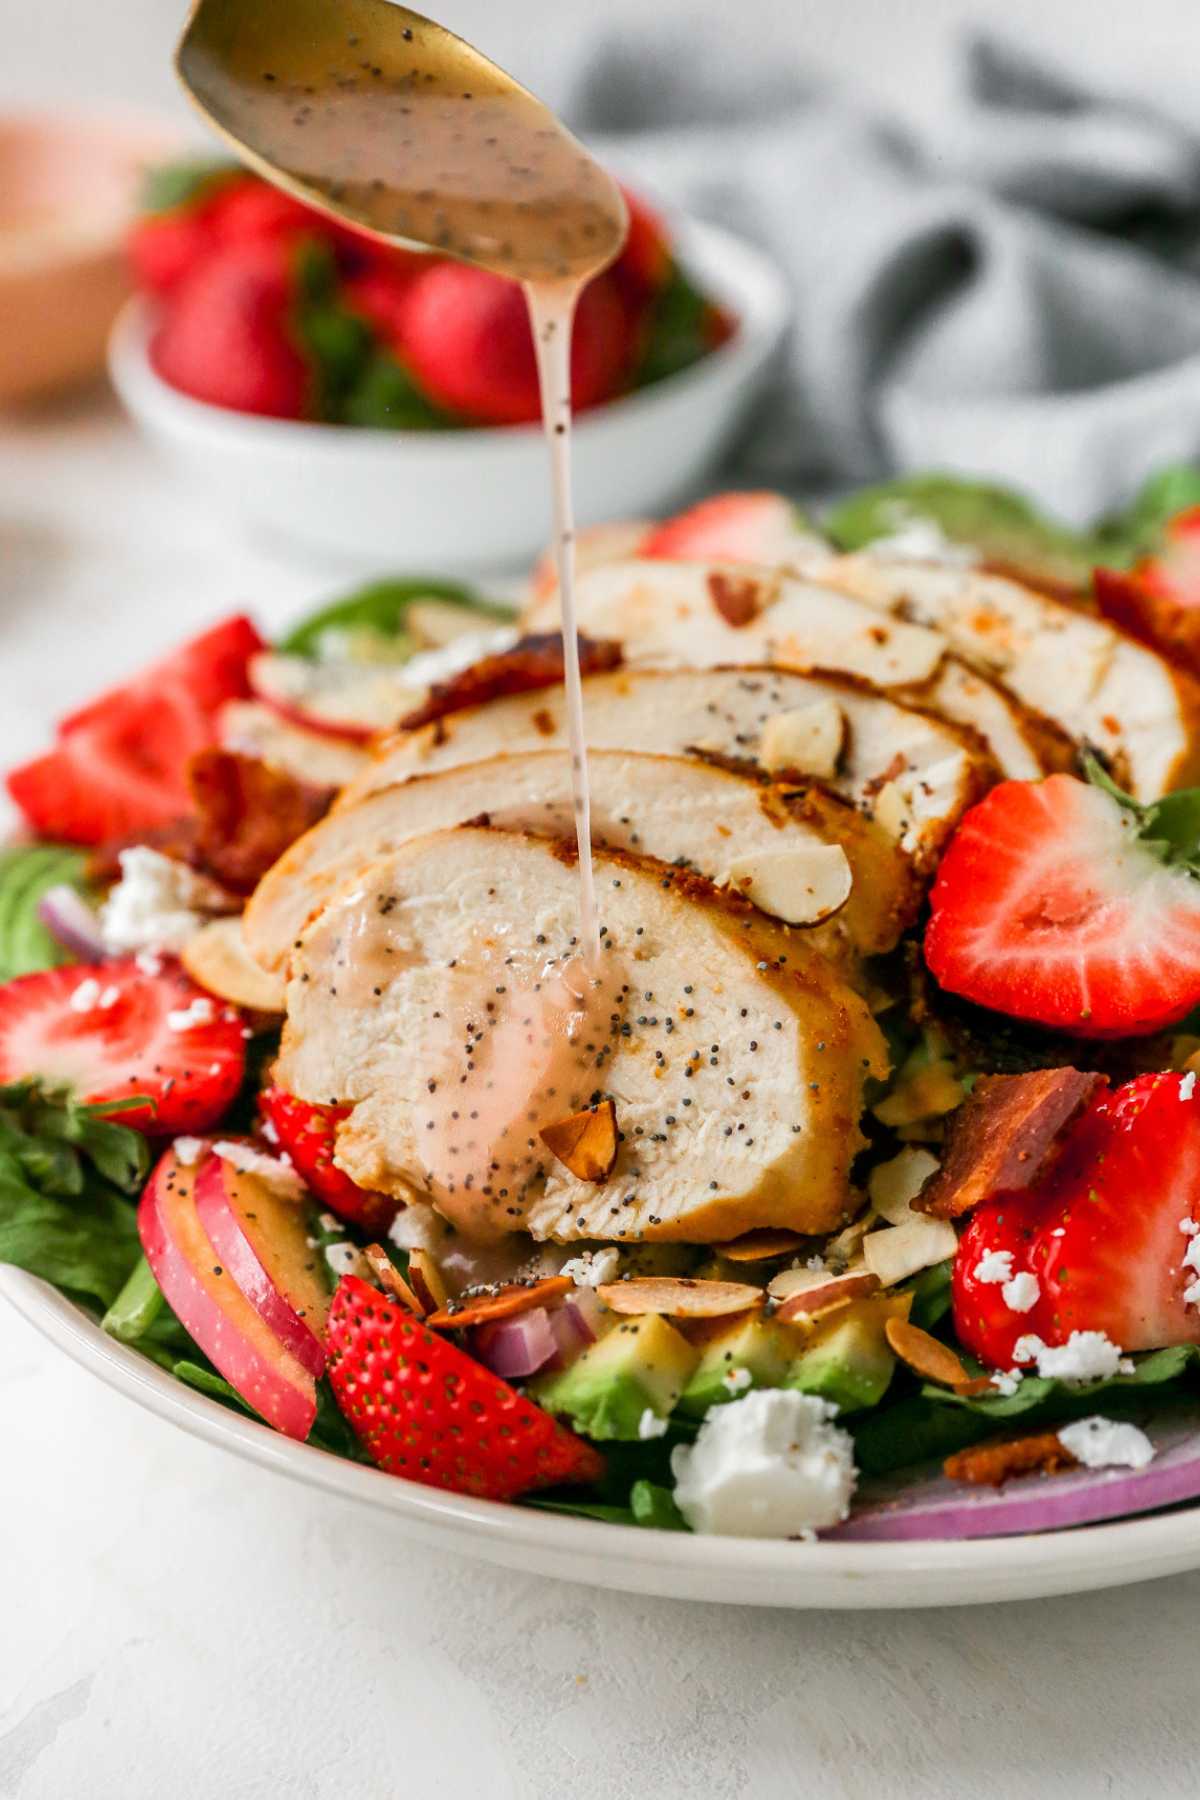 Drizzling poppy seed dressing over a strawberry salad.